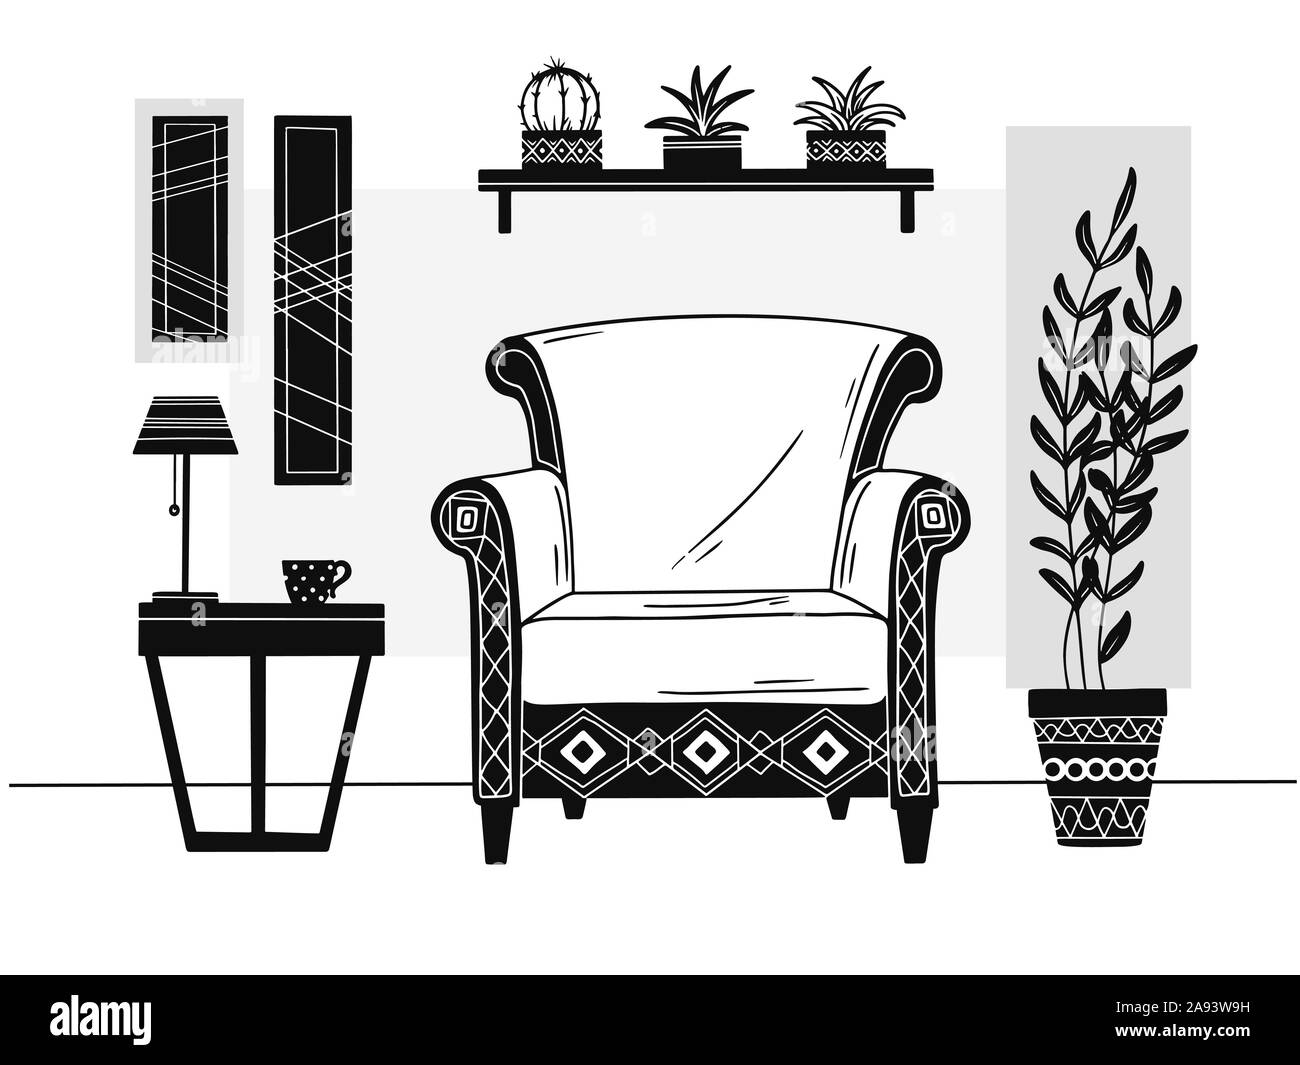 Chair, table with mug. Shelf with books and plants. Hand drawn vector illustration of a sketch style Stock Vector